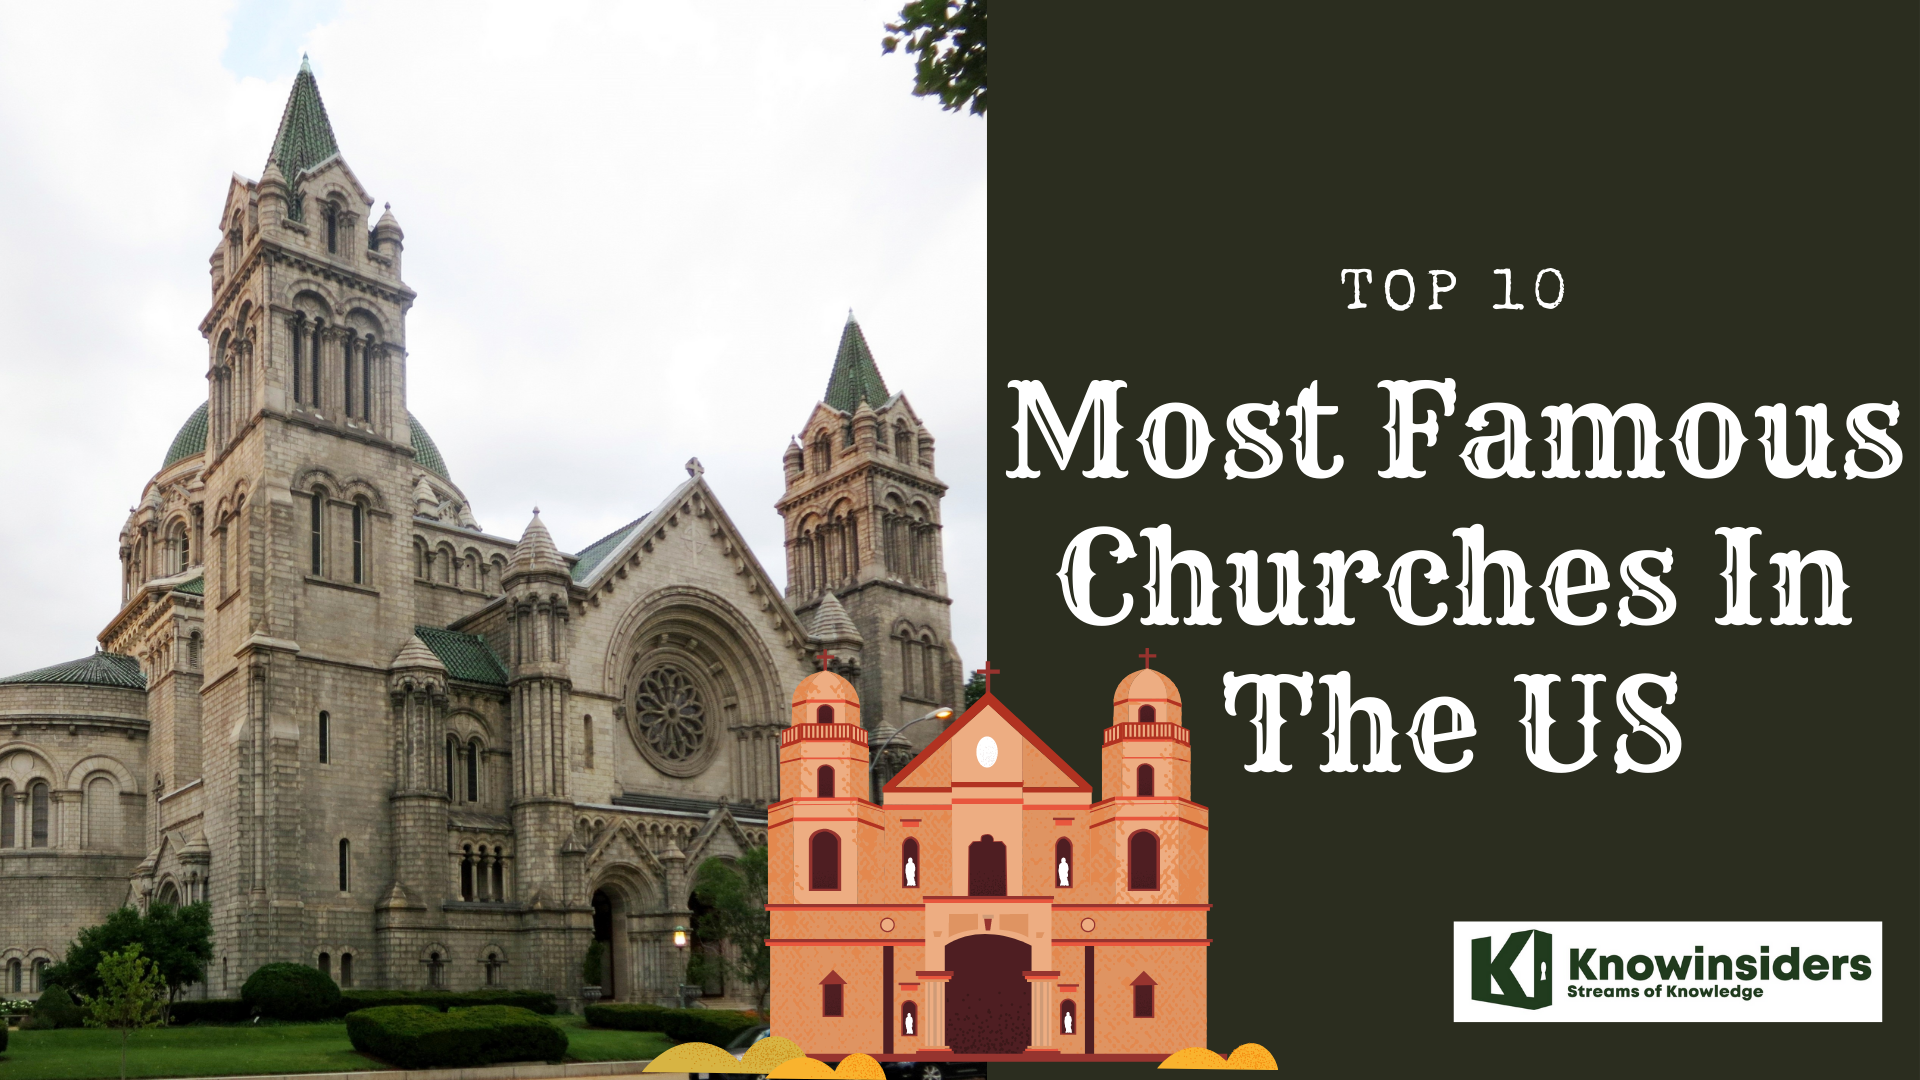 Top 10 Most Famous Churches in America